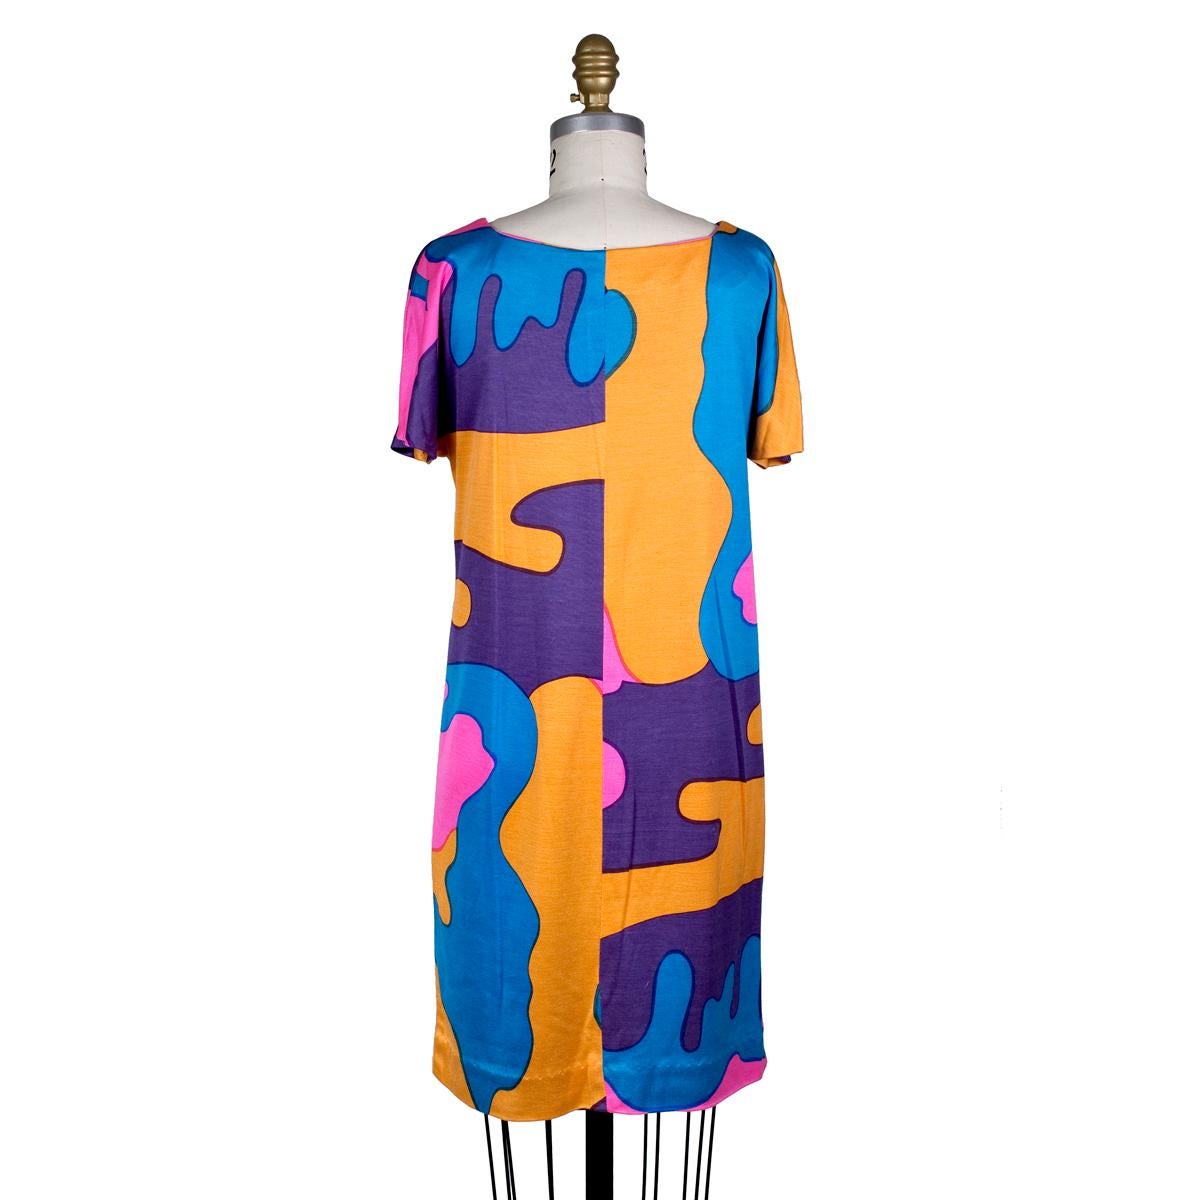 Product Details:
Vintage shift dress by Stephen Sprouse C. 1987
Camo print in orange, pink, and blue
Knit silk material that feels like a stretch jersey cotton
Condition: Great, with a few fabric pulls 

Size/Measurements:
Size 8 (US)
36